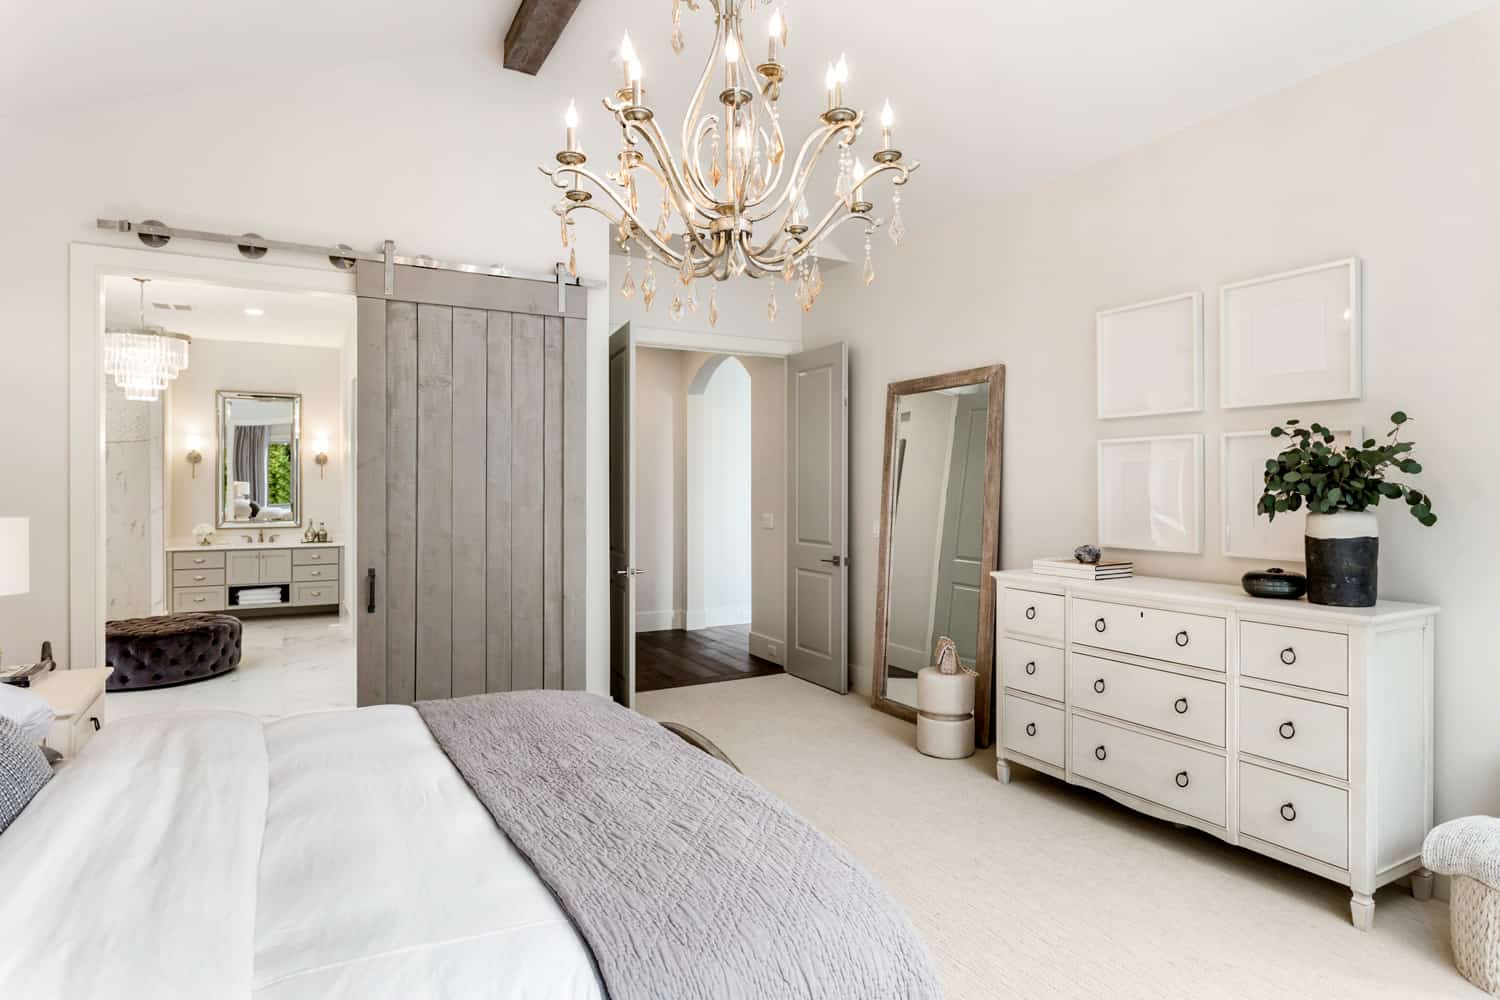 Beautiful master bedroom in new luxury home with view of ensuite master bathroom.